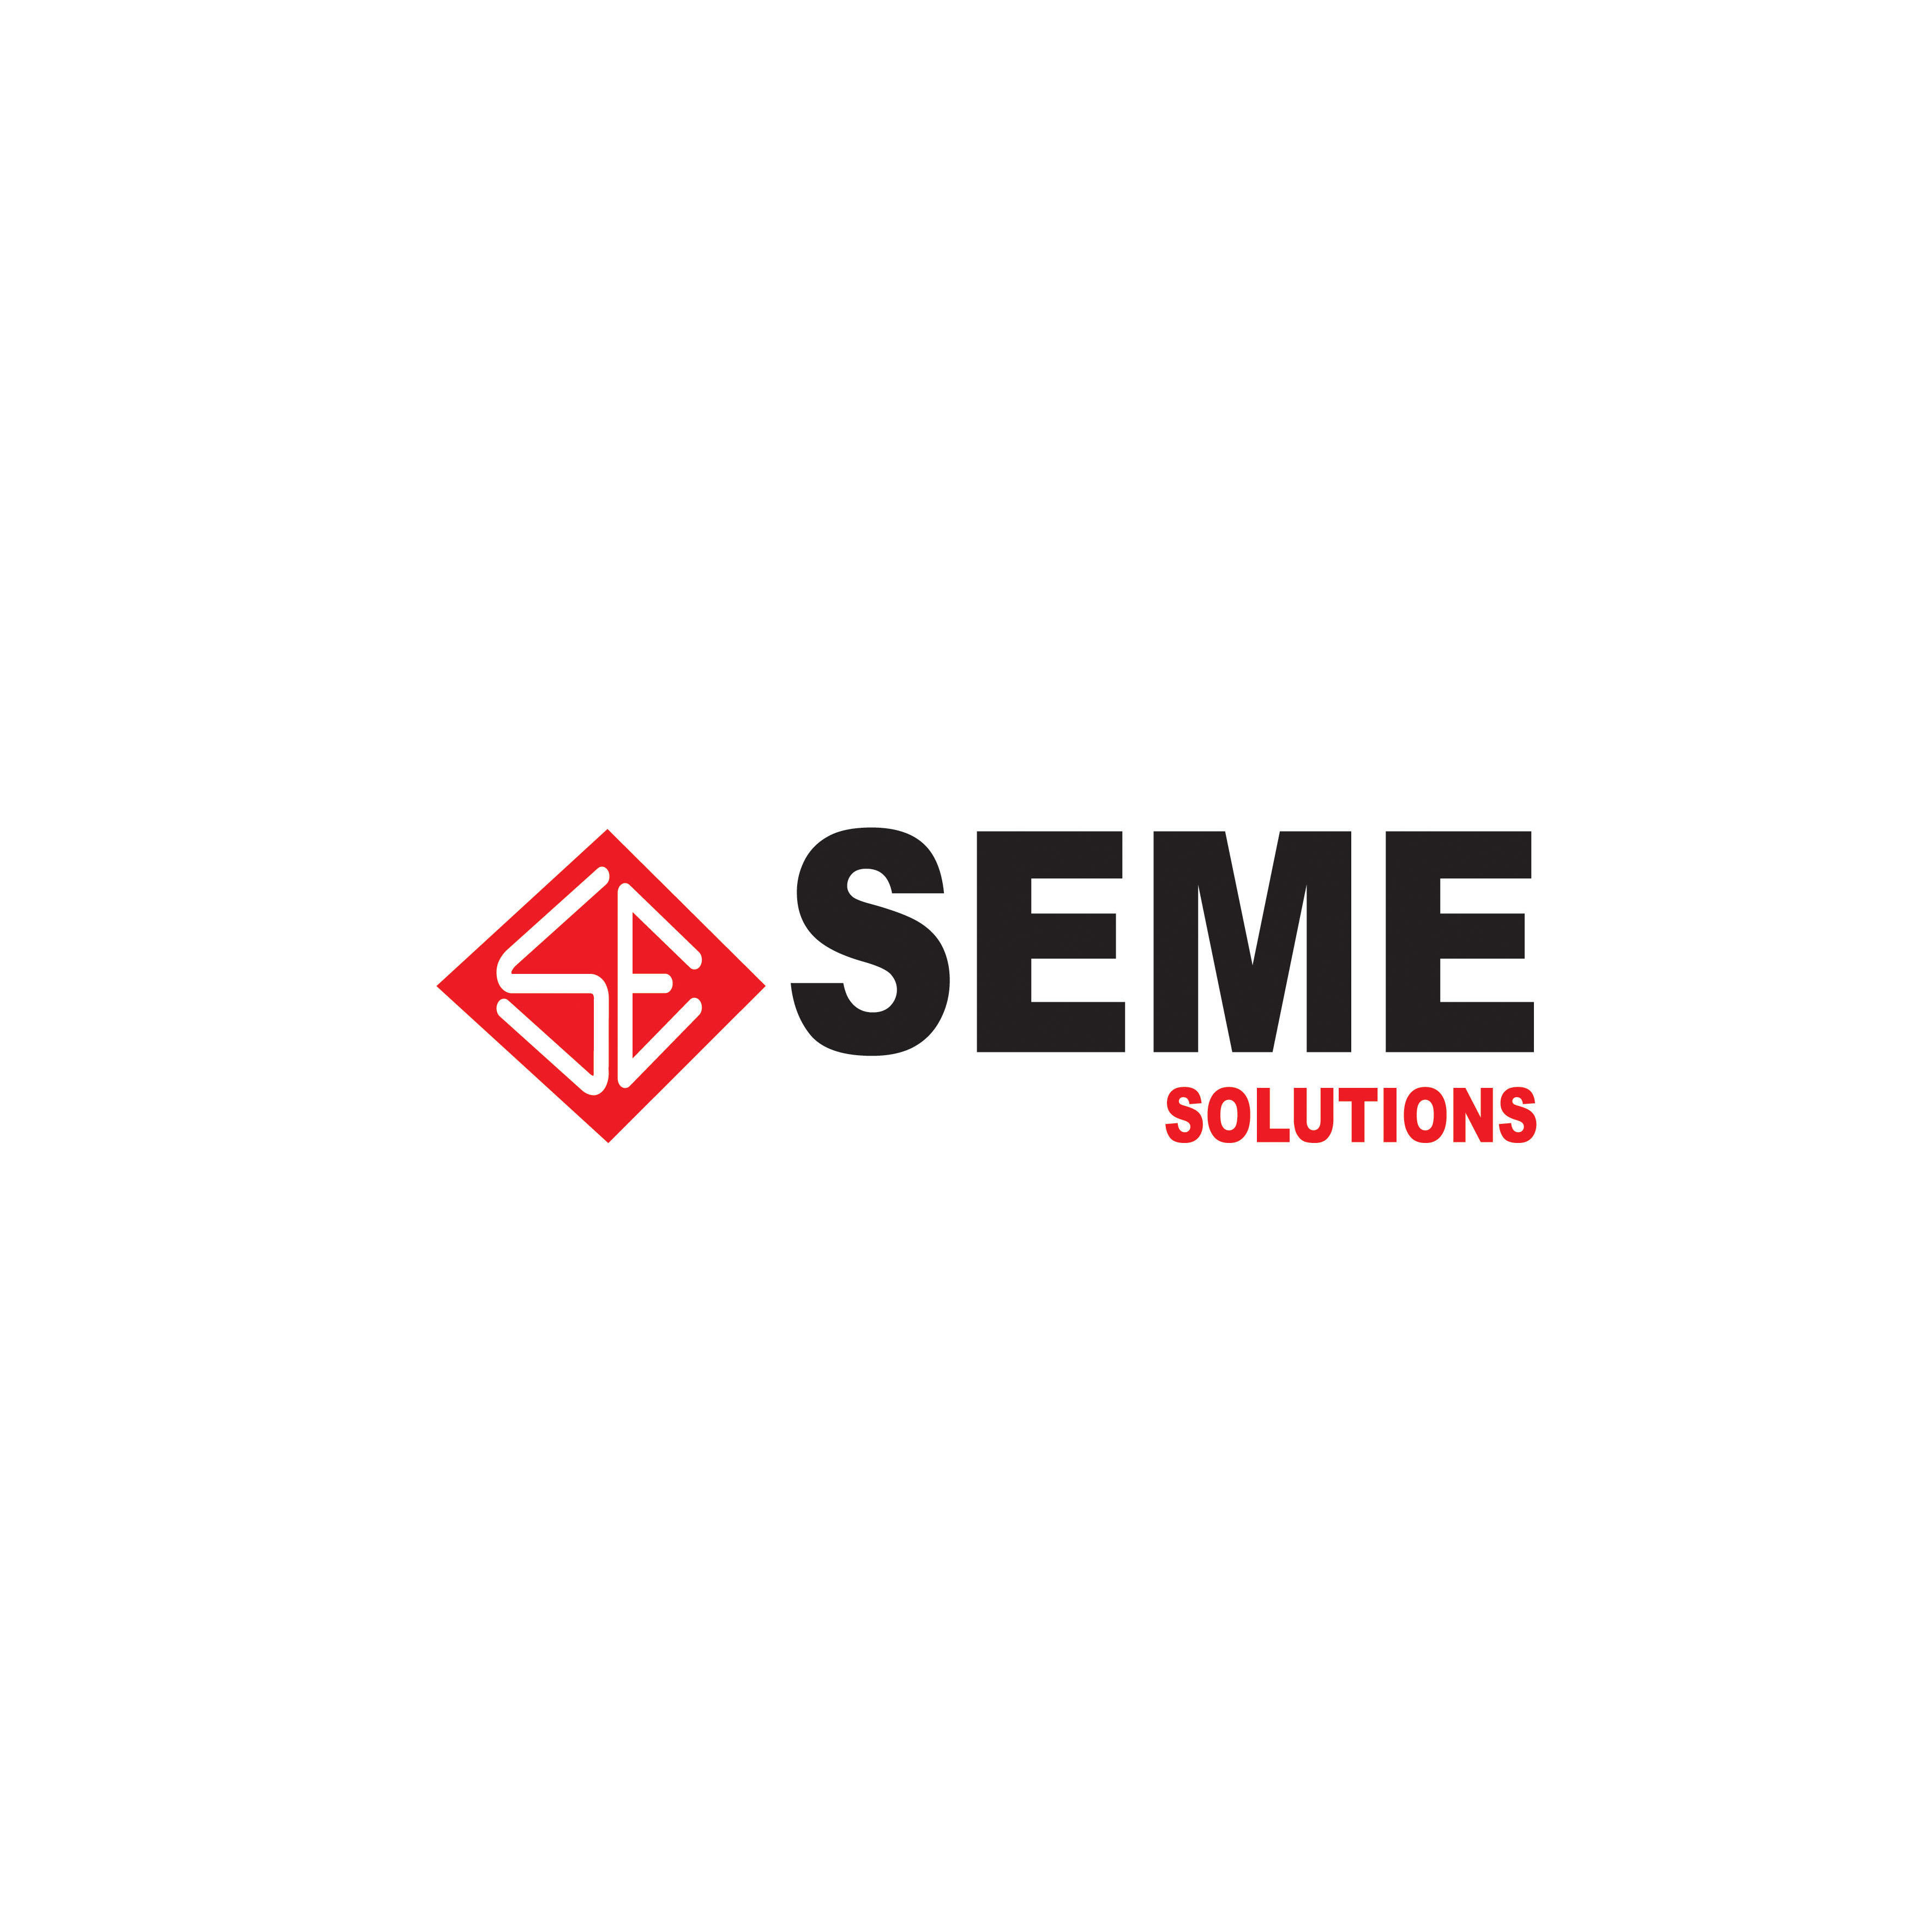 SEME Solutions - Paget, QLD 4740 - (07) 4842 3900 | ShowMeLocal.com